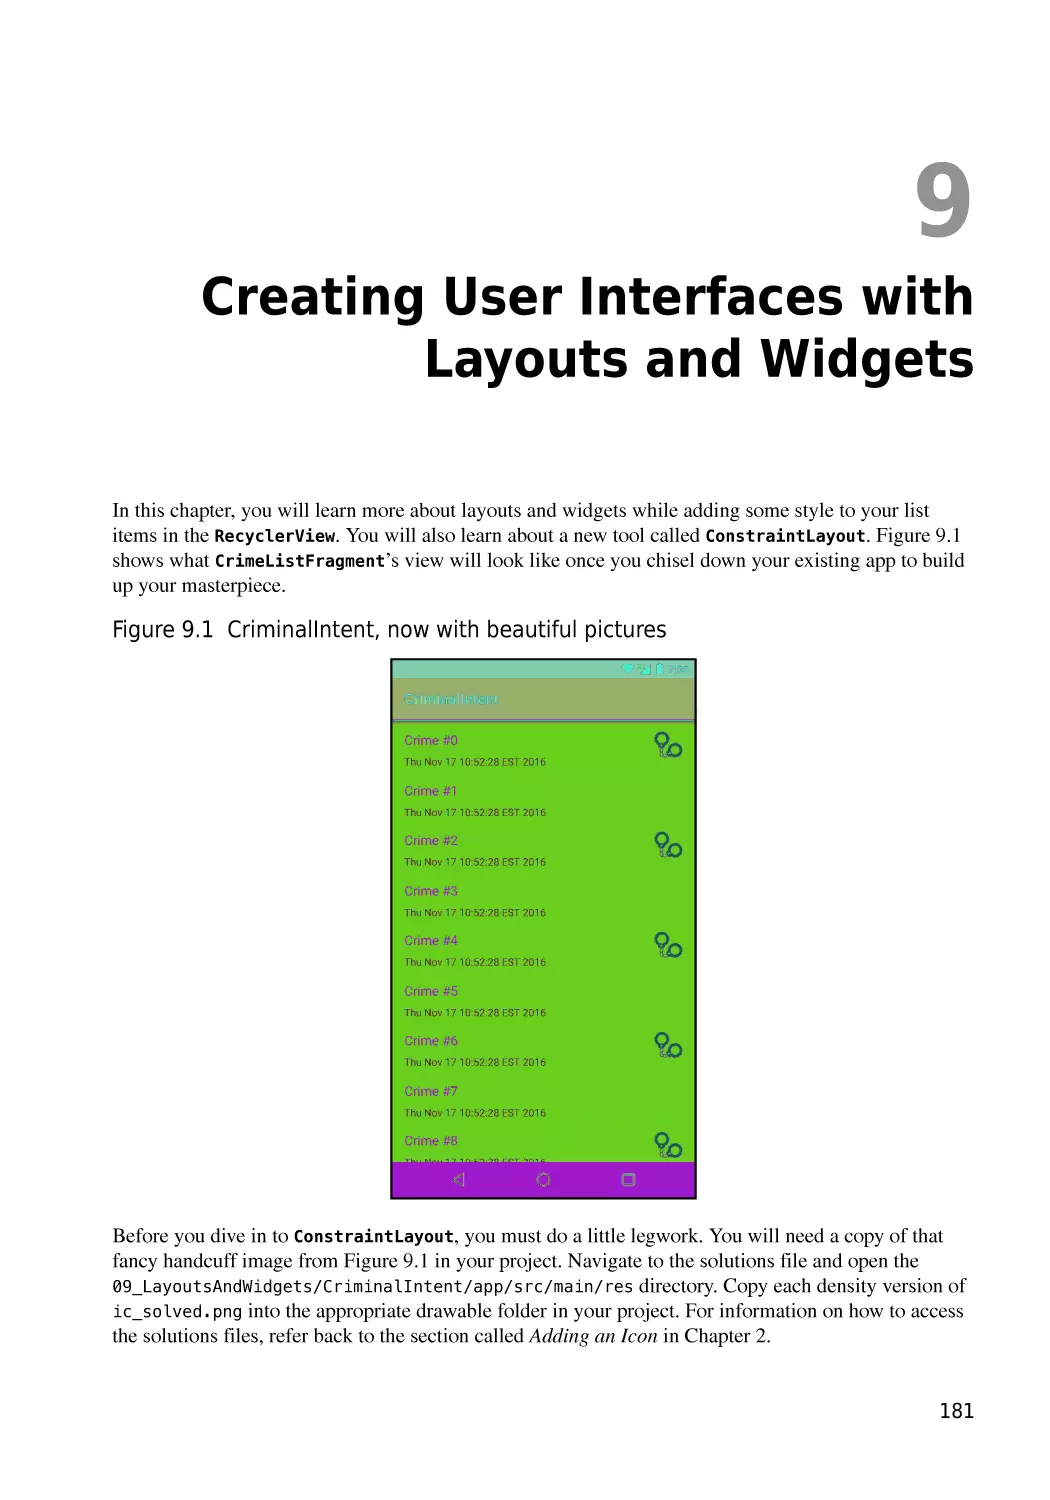 Chapter 9  Creating User Interfaces with Layouts and Widgets